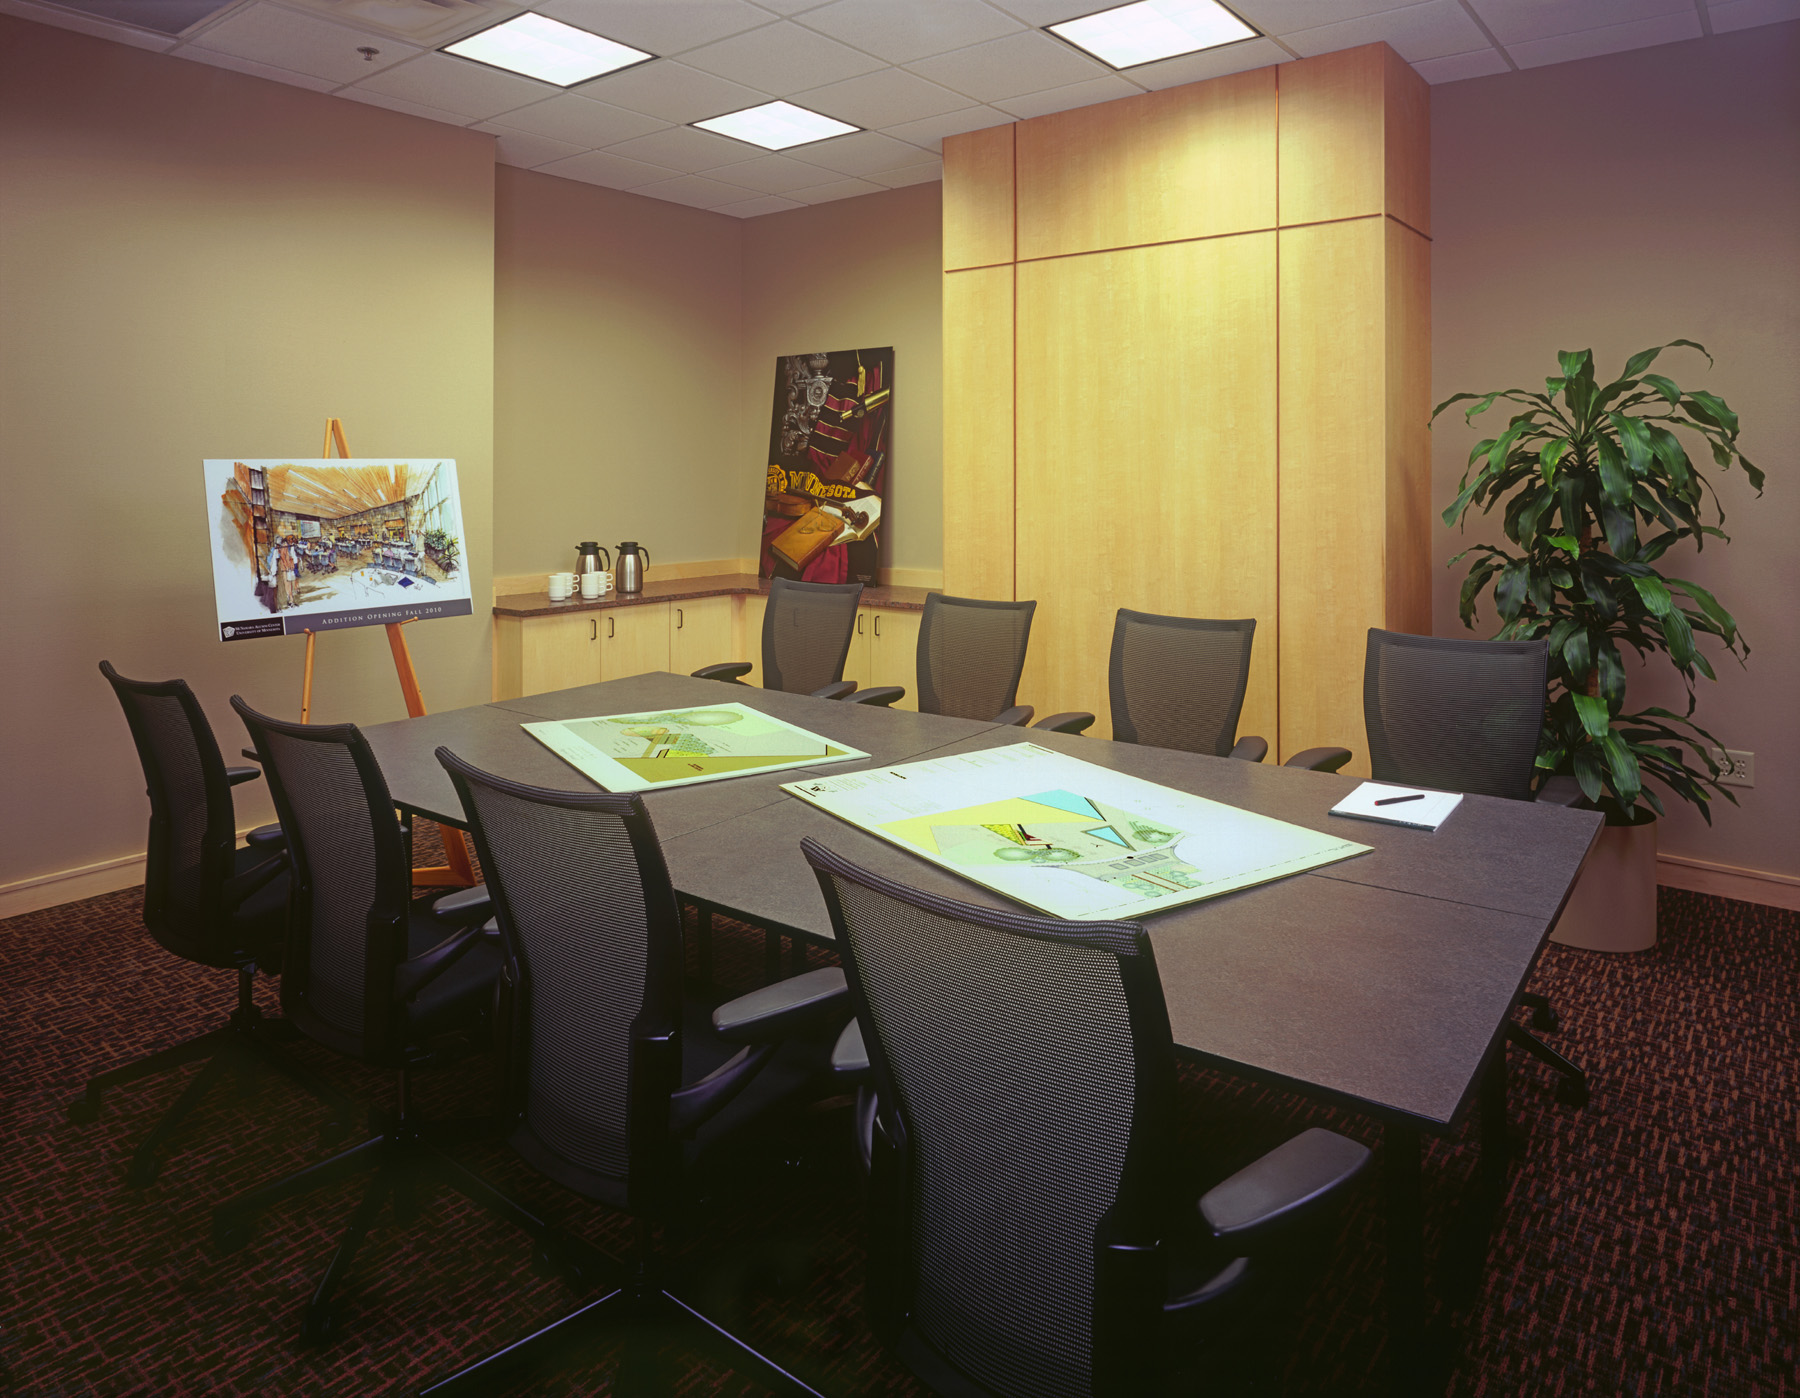 A small conference room with a table in the center, there are 8 chairs around it.